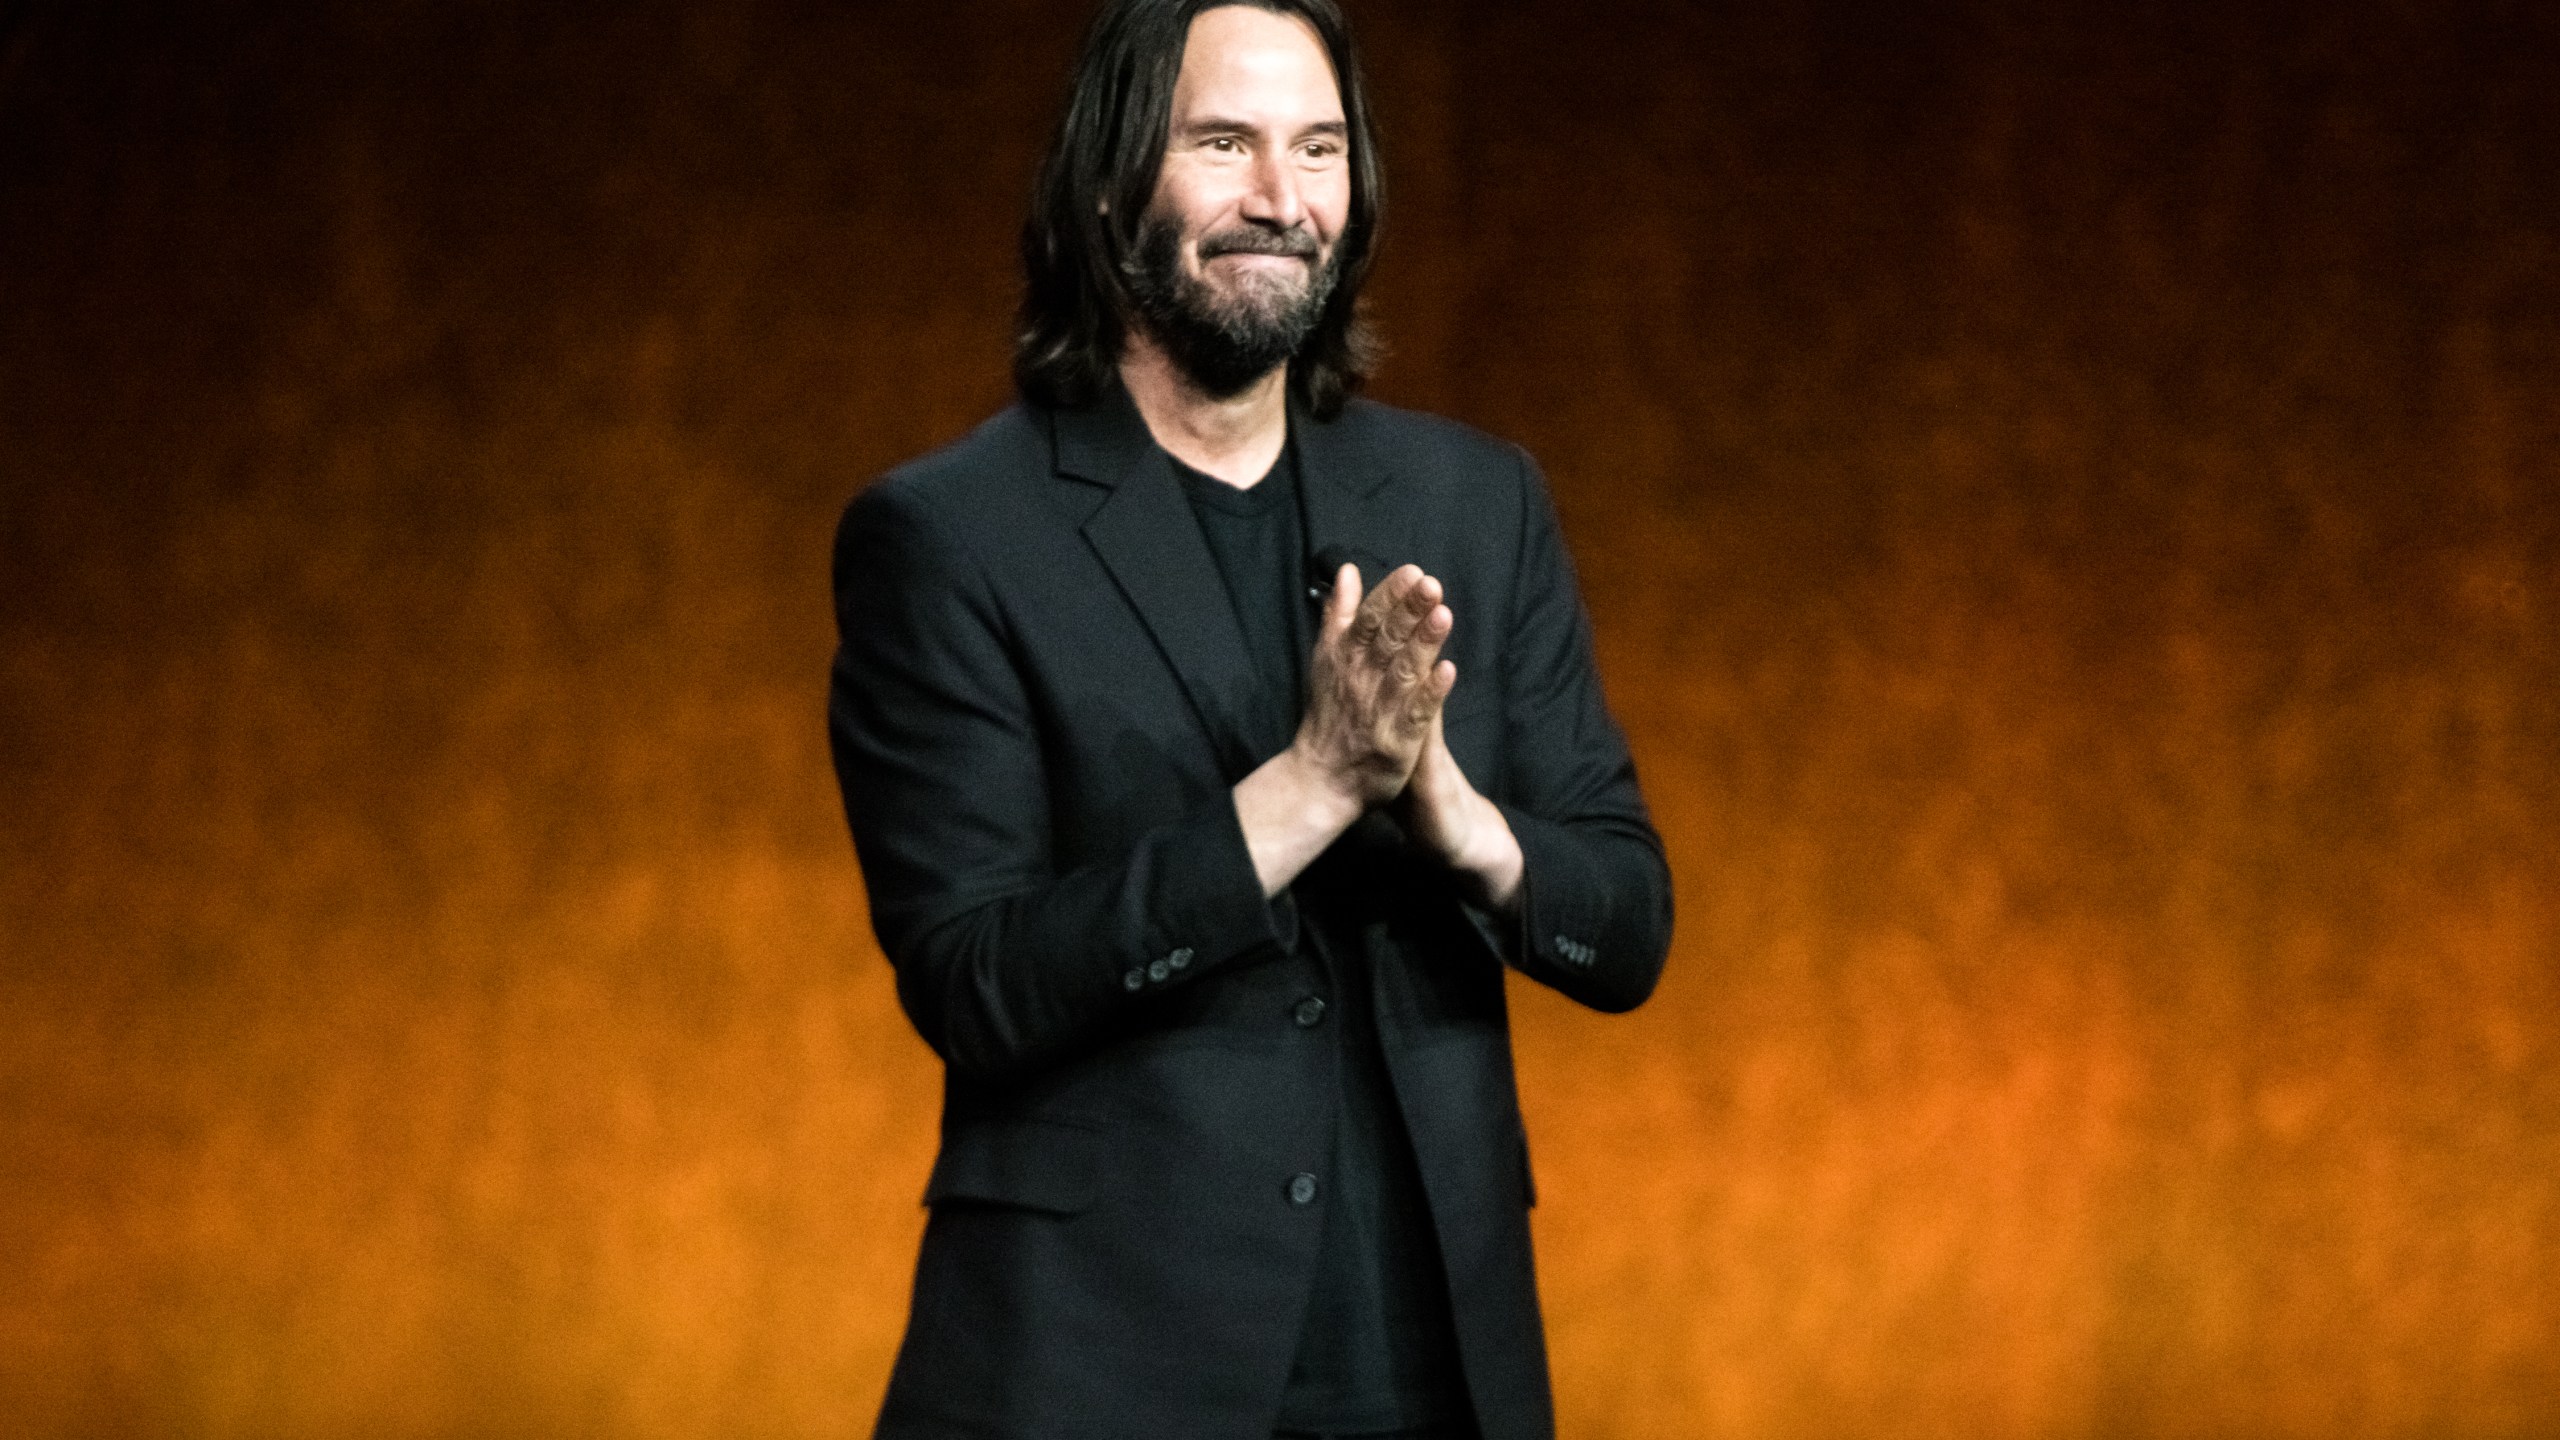 Actor Keanu Reeves presents the movie "John Wick: Chapter 4" during Lionsgate exclusive presentation at Caesars Palace during CinemaCon 2022, the official convention of the National Association of Theatre Owners, on April 28, 2022 in Las Vegas. (Greg Doherty/Getty Images)